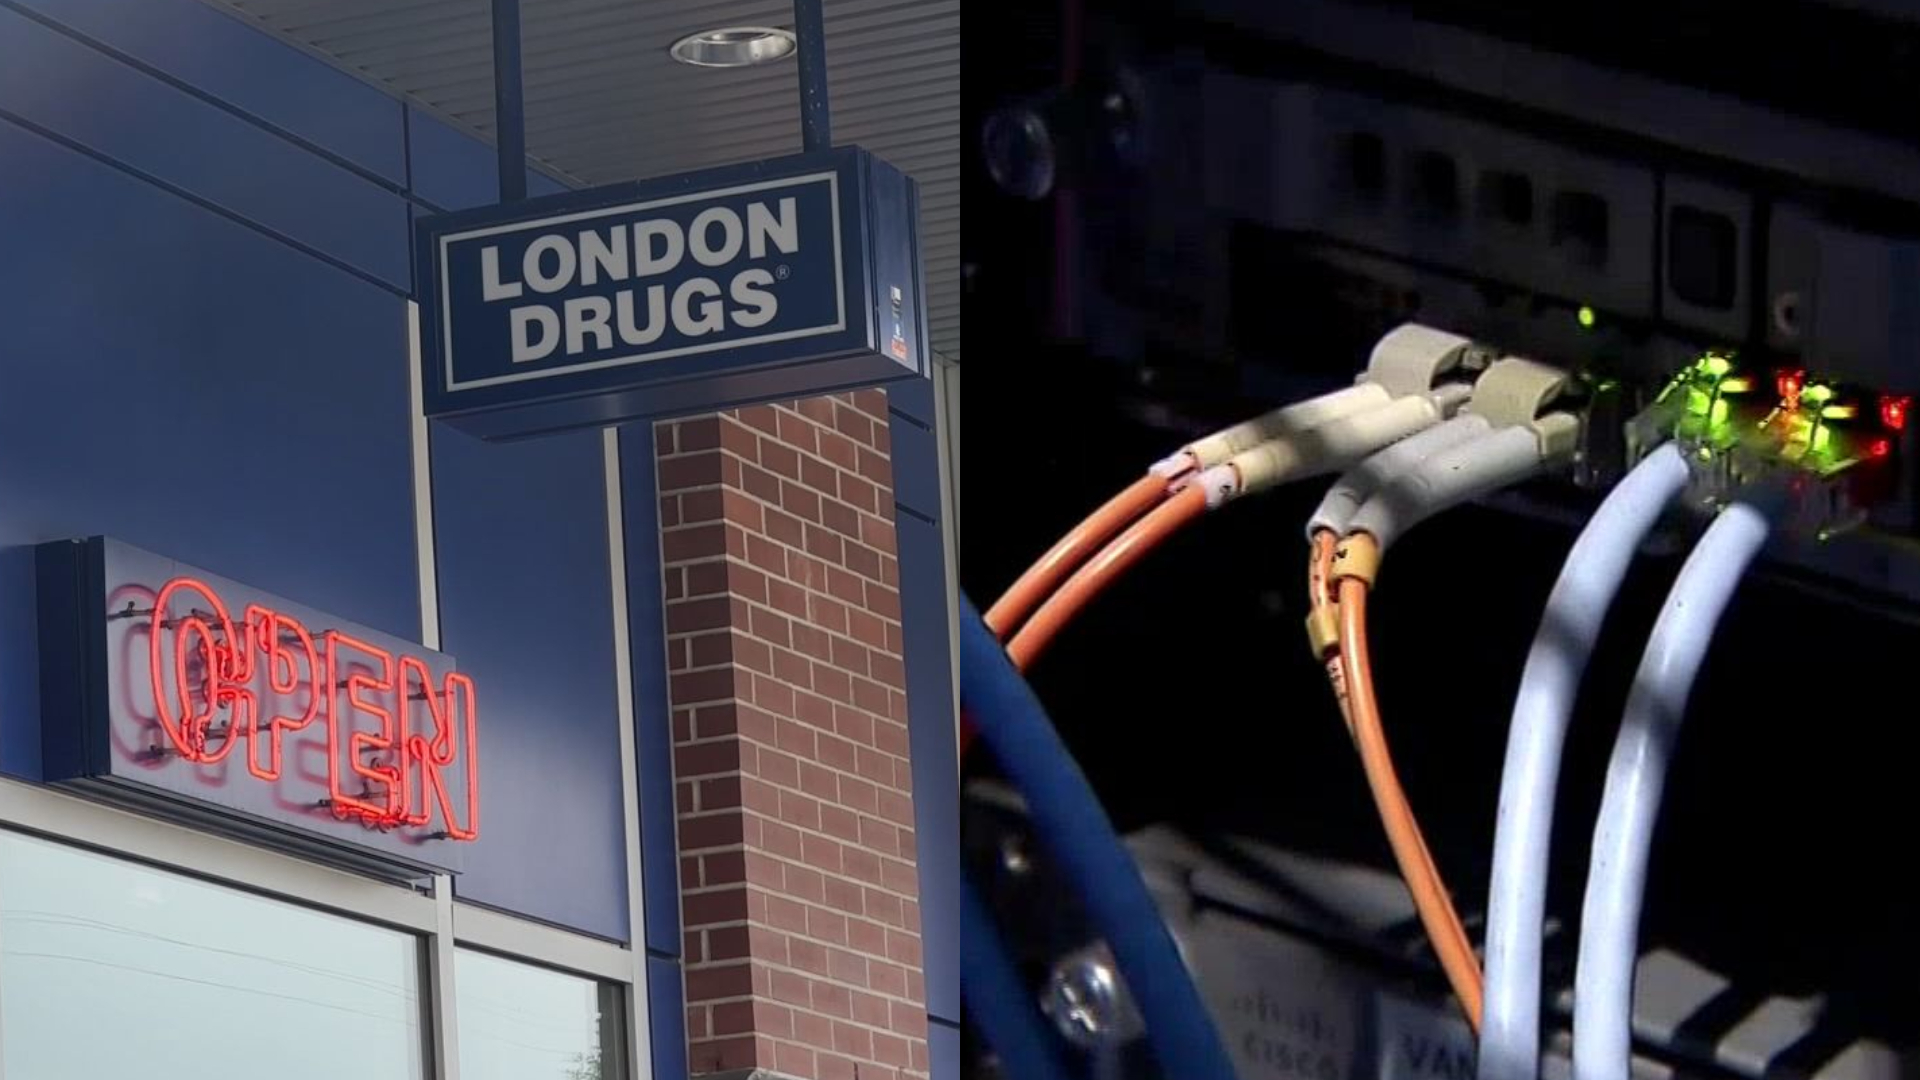 London Drugs shouldn’t pay cybercriminals: Threat analyst